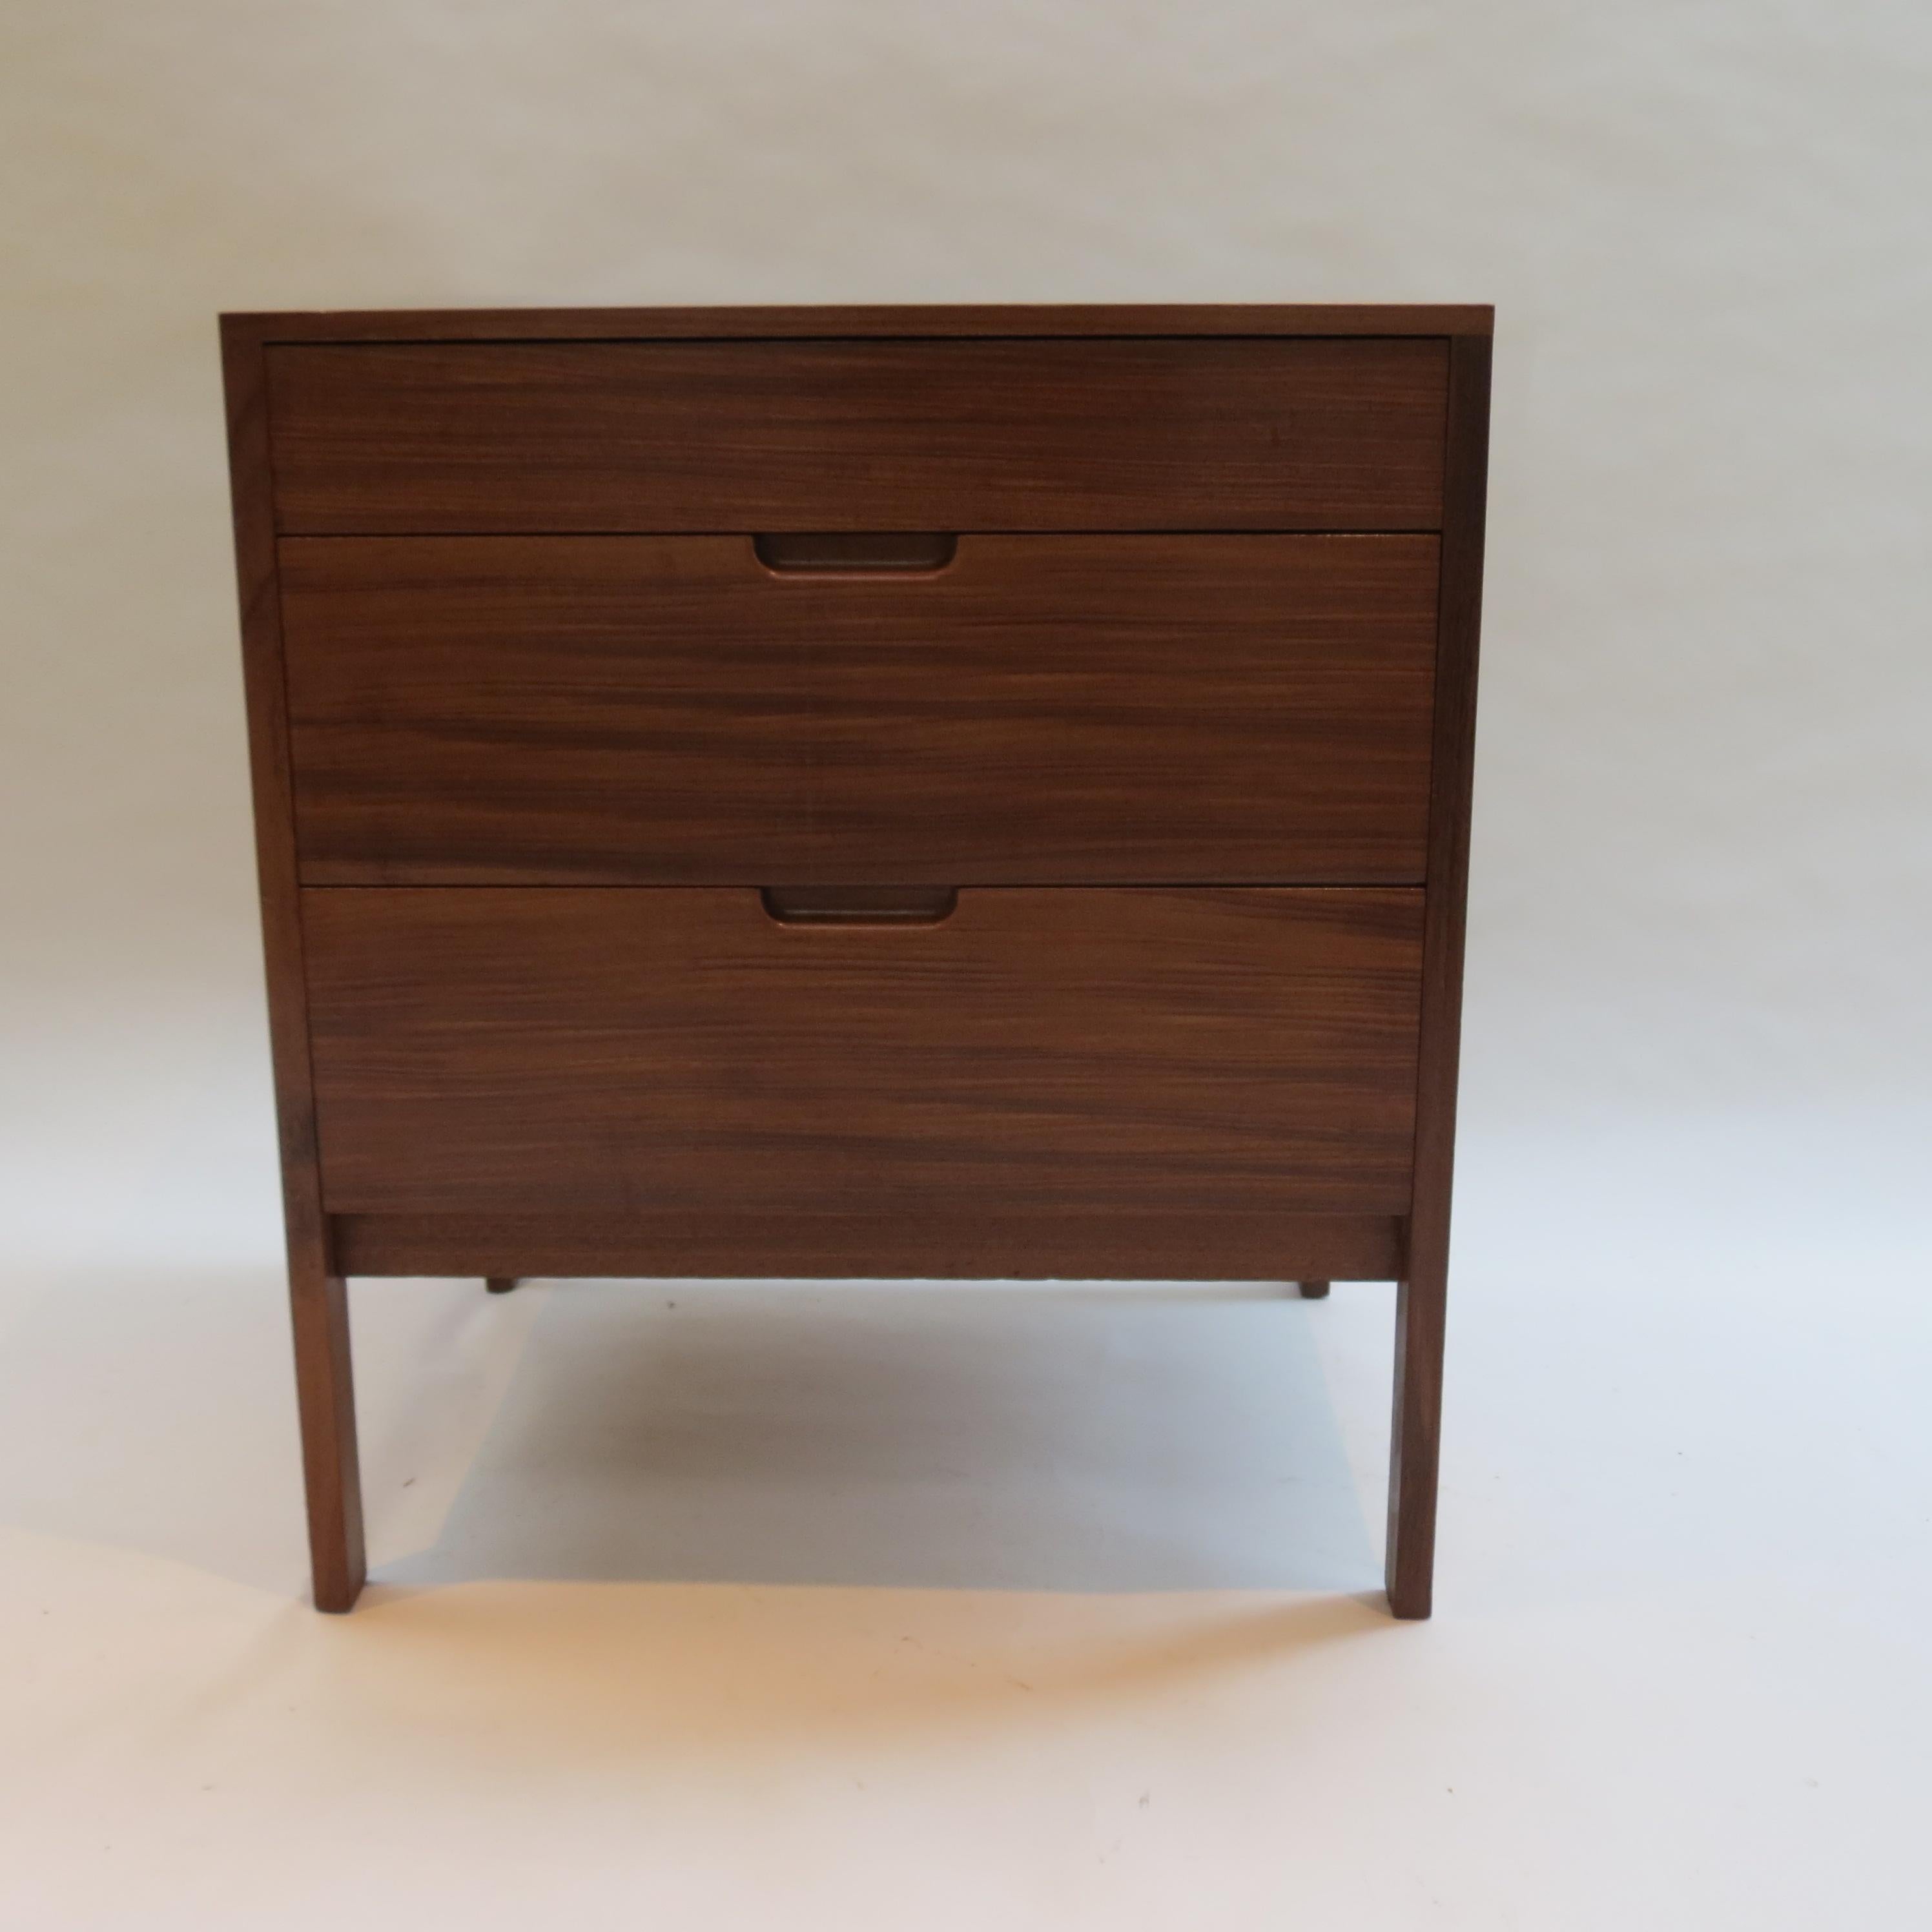 A very good quality Midcentury chest of drawers, designed by Richard Hornby and produced by Fyne Ladye of Banbury UK in the 1960s.
Made from Afrormosia with solid Afrormosia drawer fronts and Brazilian Mahogany drawer linings and recessed handles.